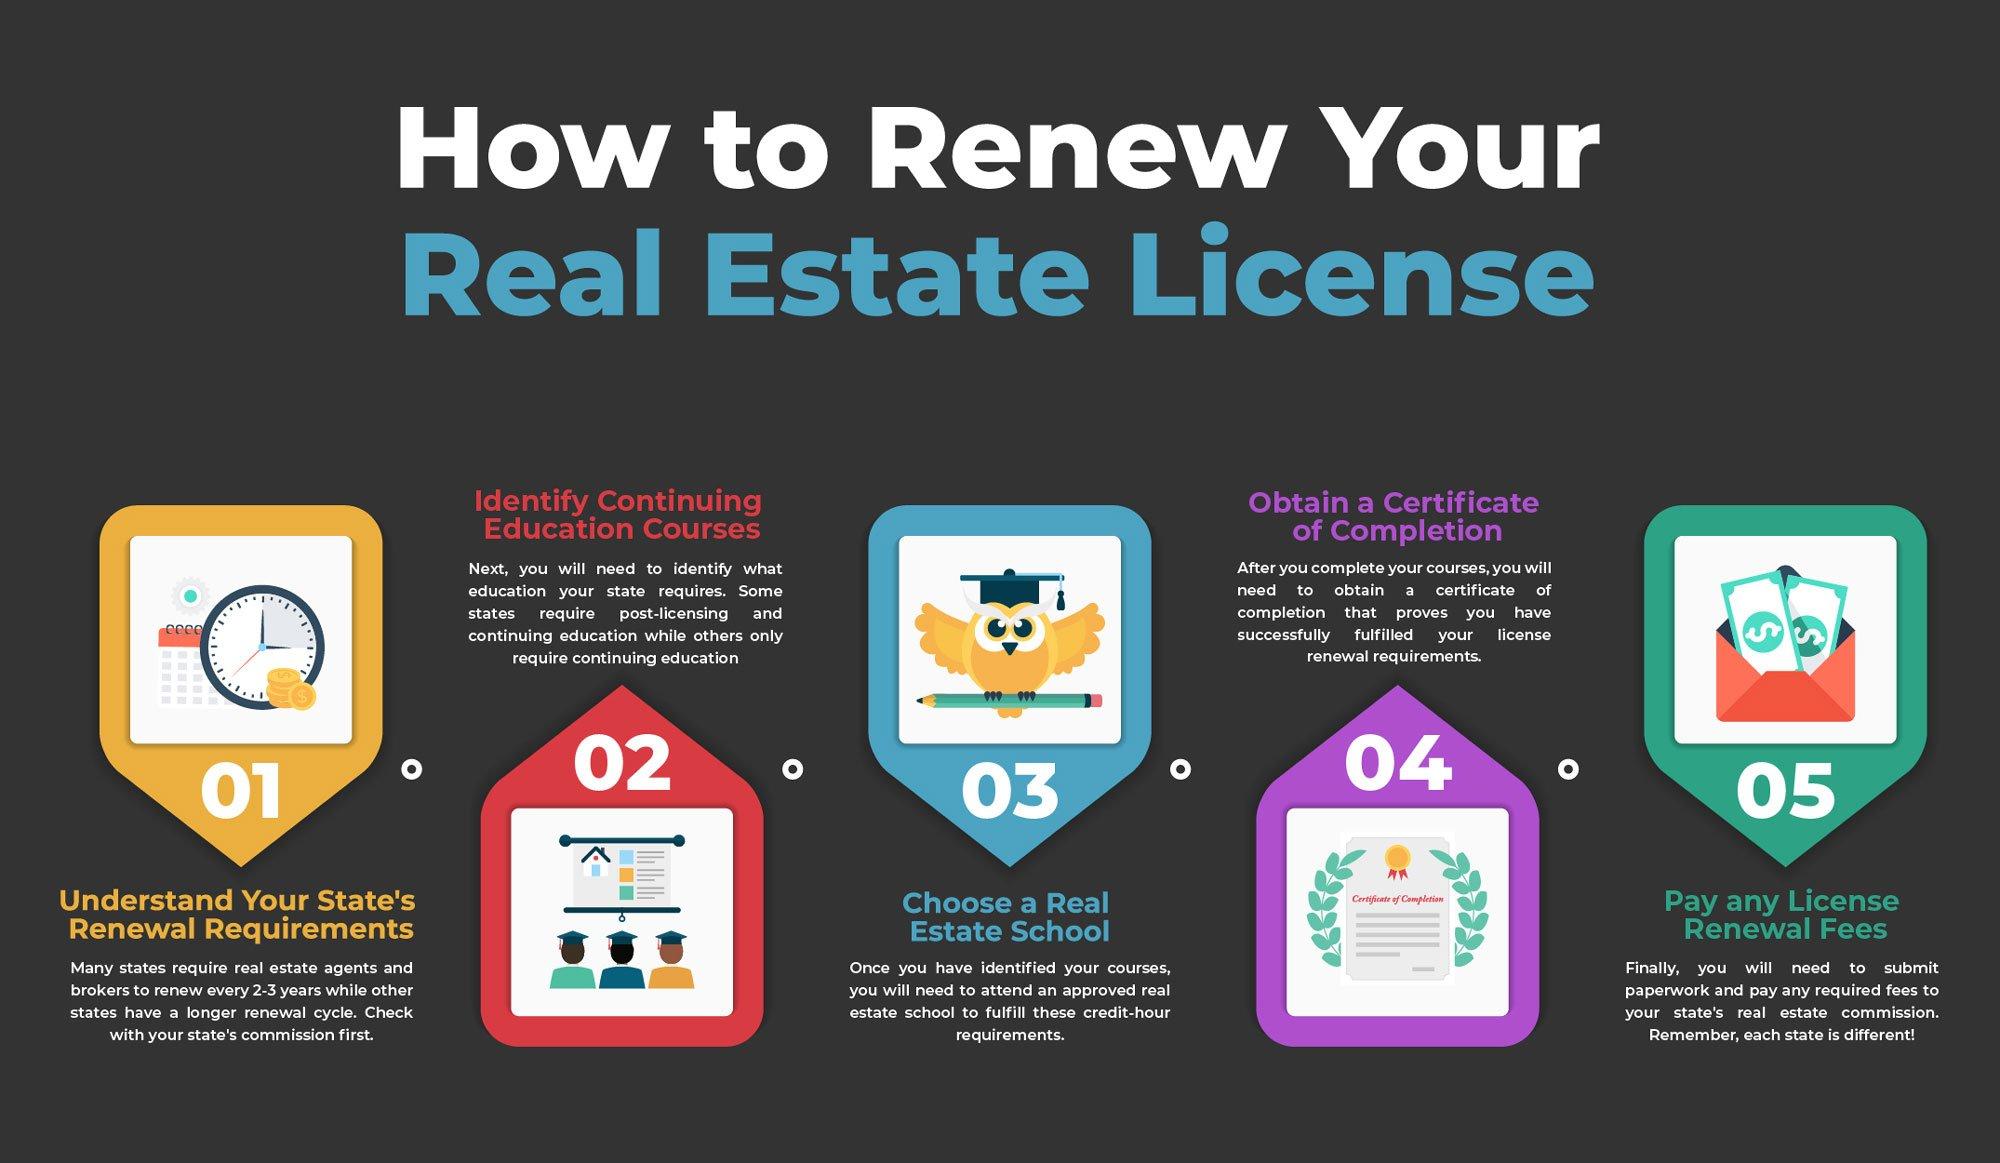 How many ce hours for real estate license renewal